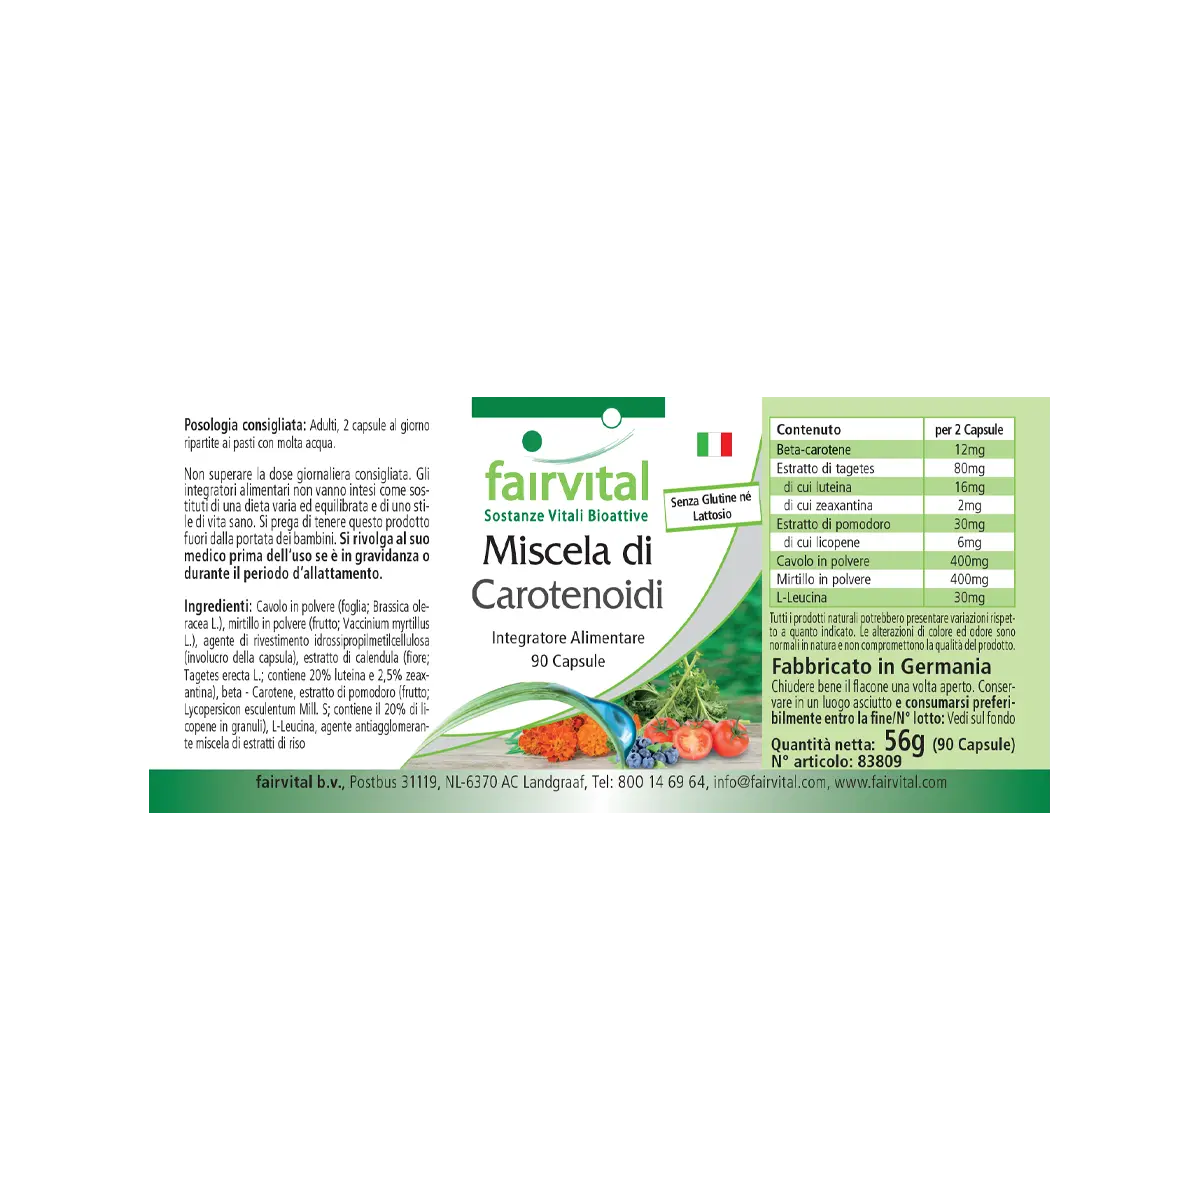 Carotenoid Mix with anthocyanins - 90 capsules